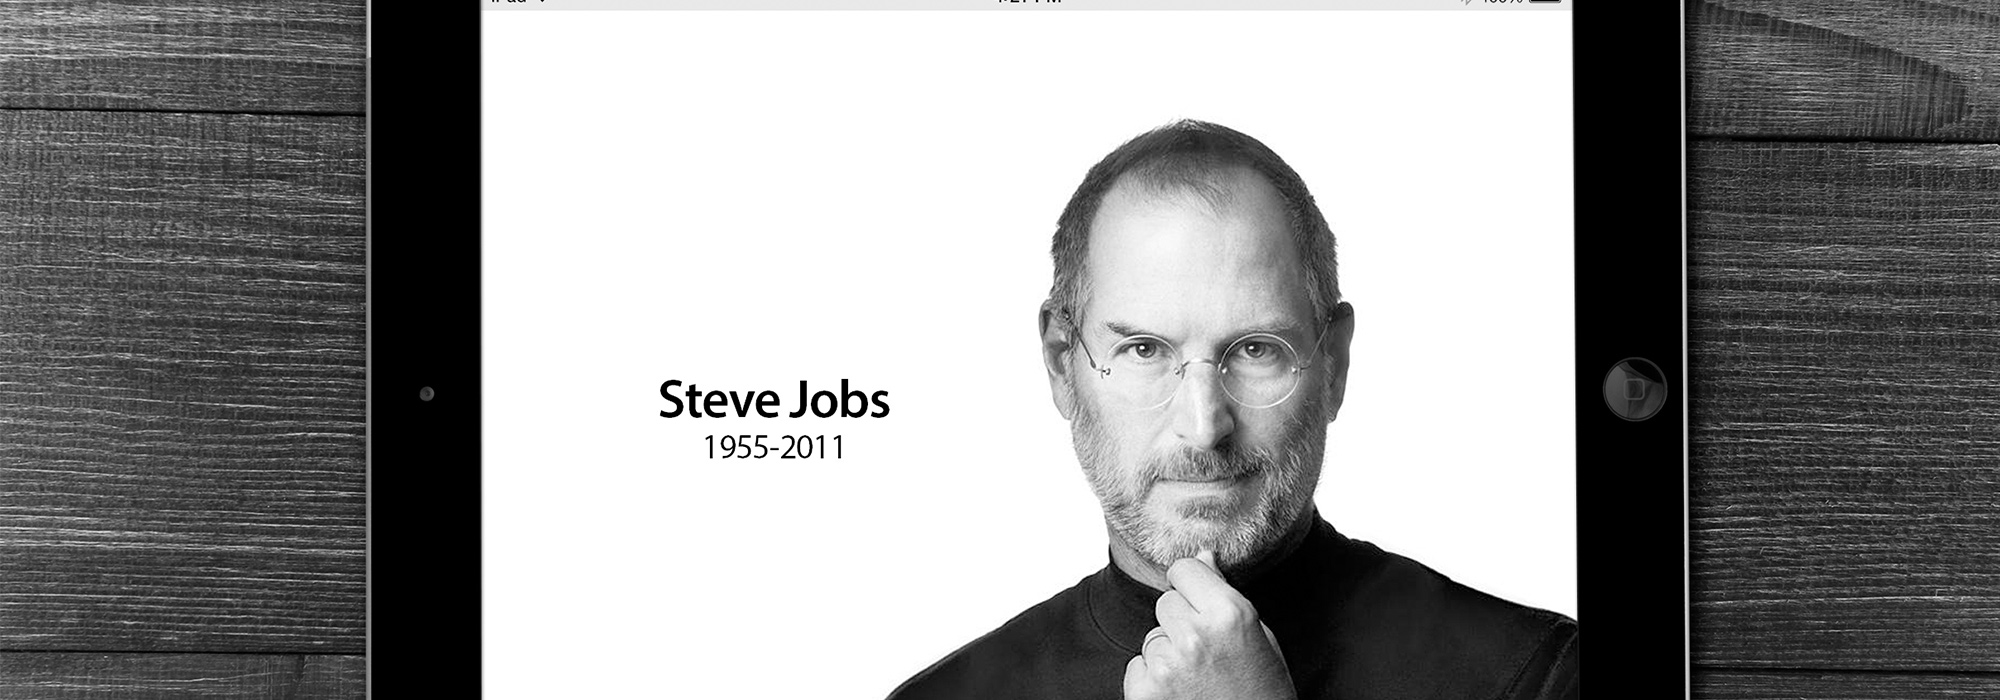 The importance of Steve Jobs